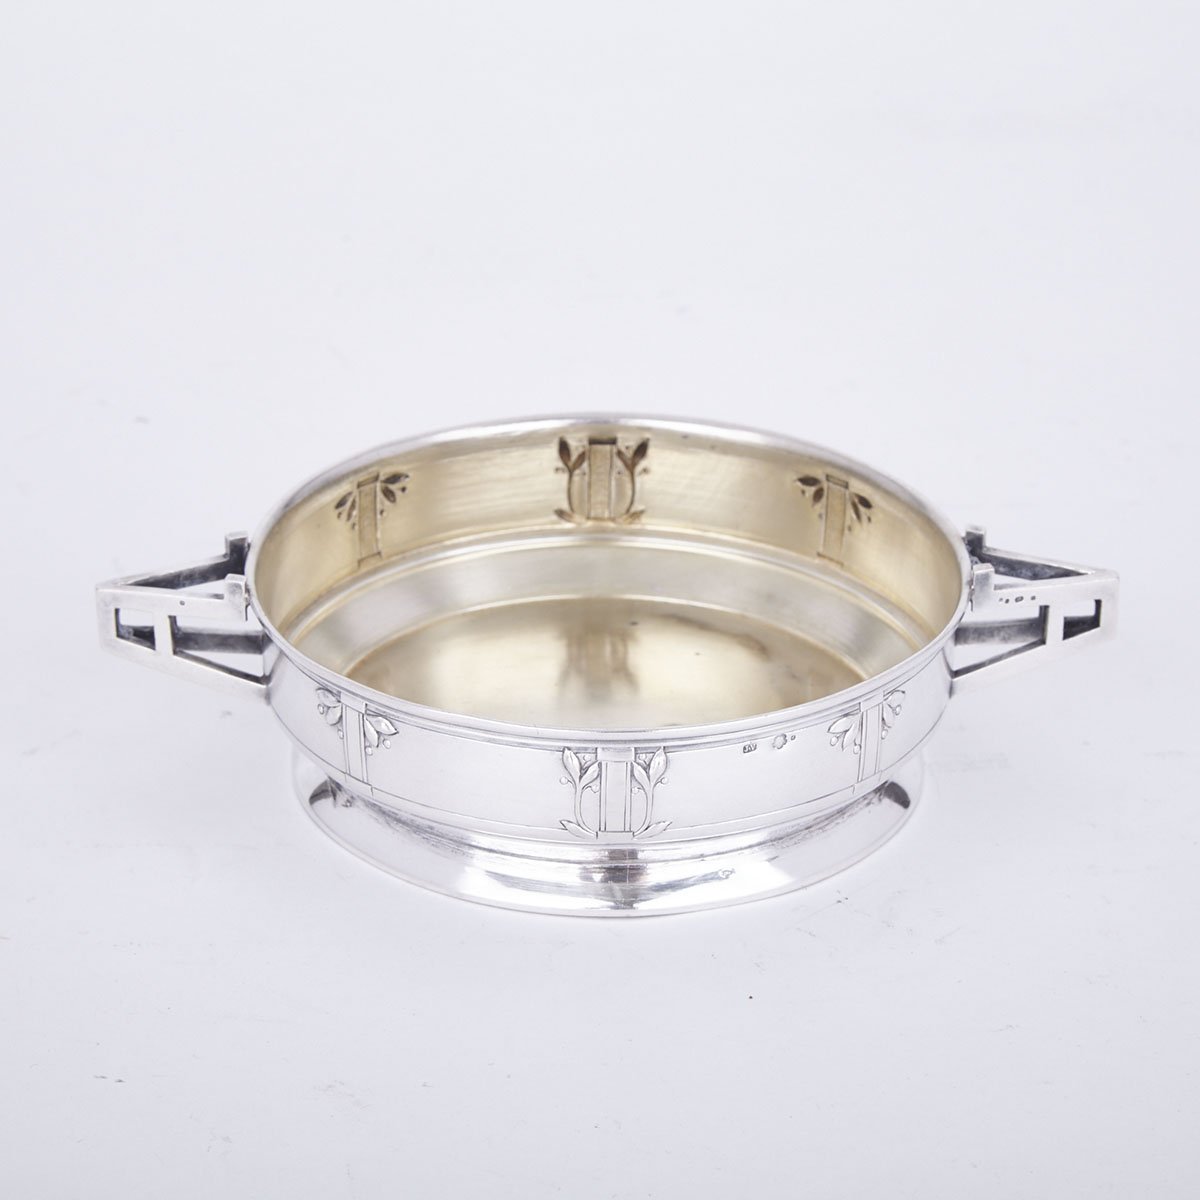 Austro-Hungarian Secessionist Silver Two-Handled Shallow Bowl, Vienna, early 20th century